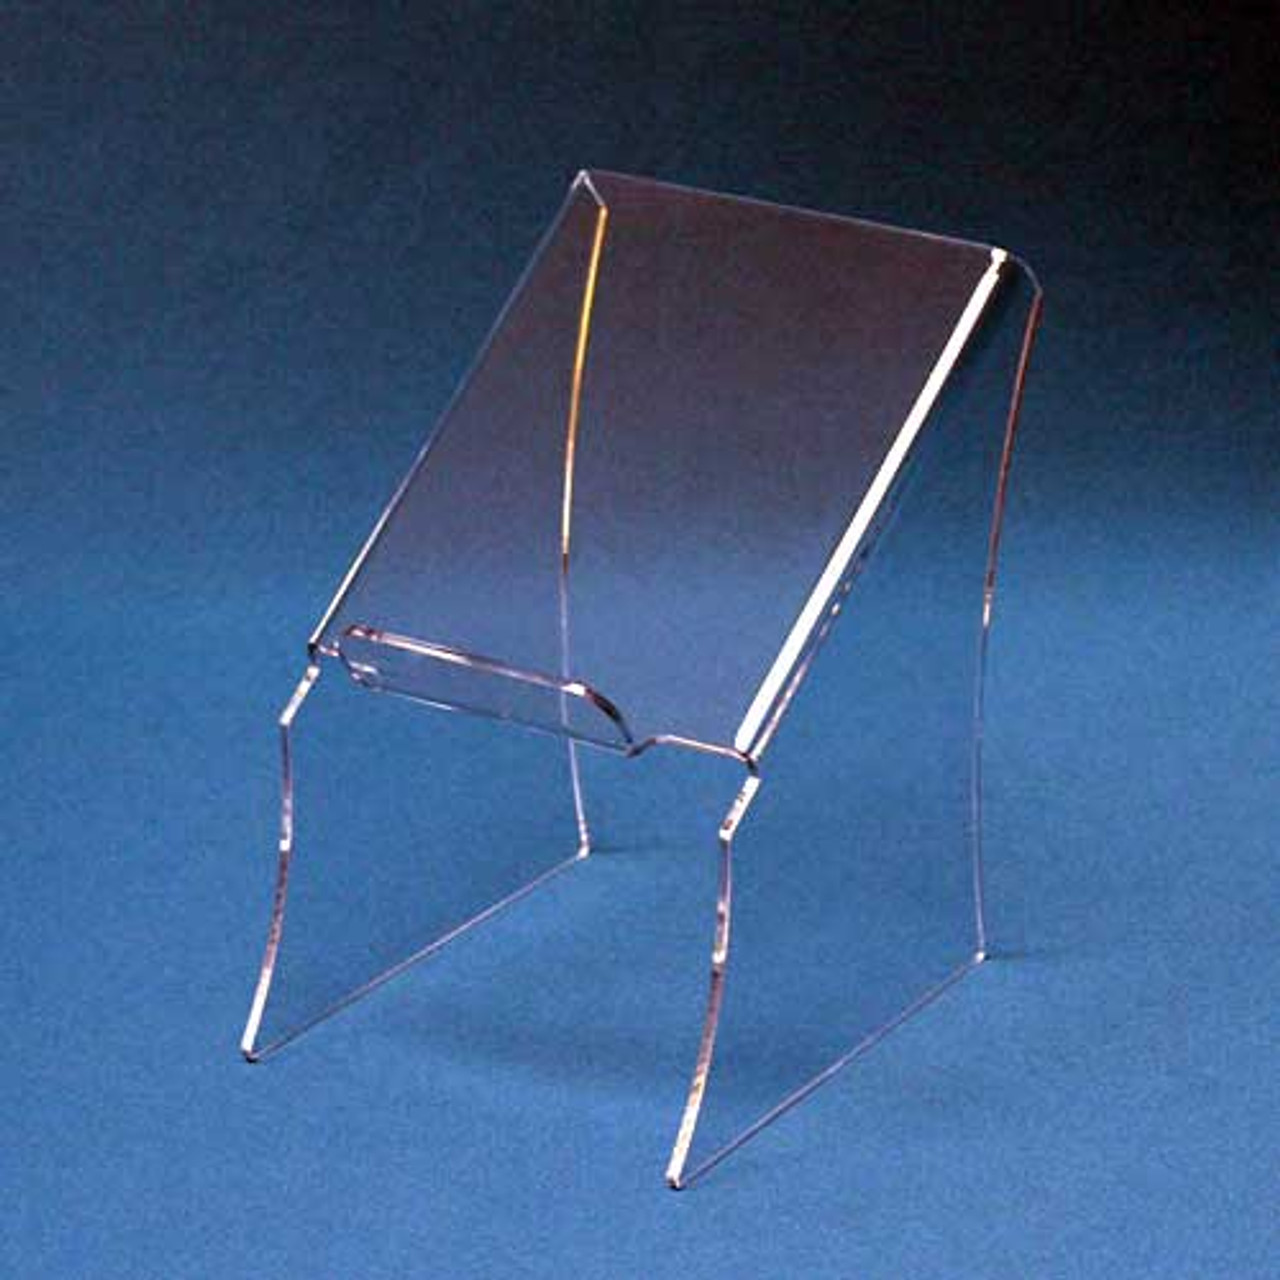 Acrylic Elevated Book Easels